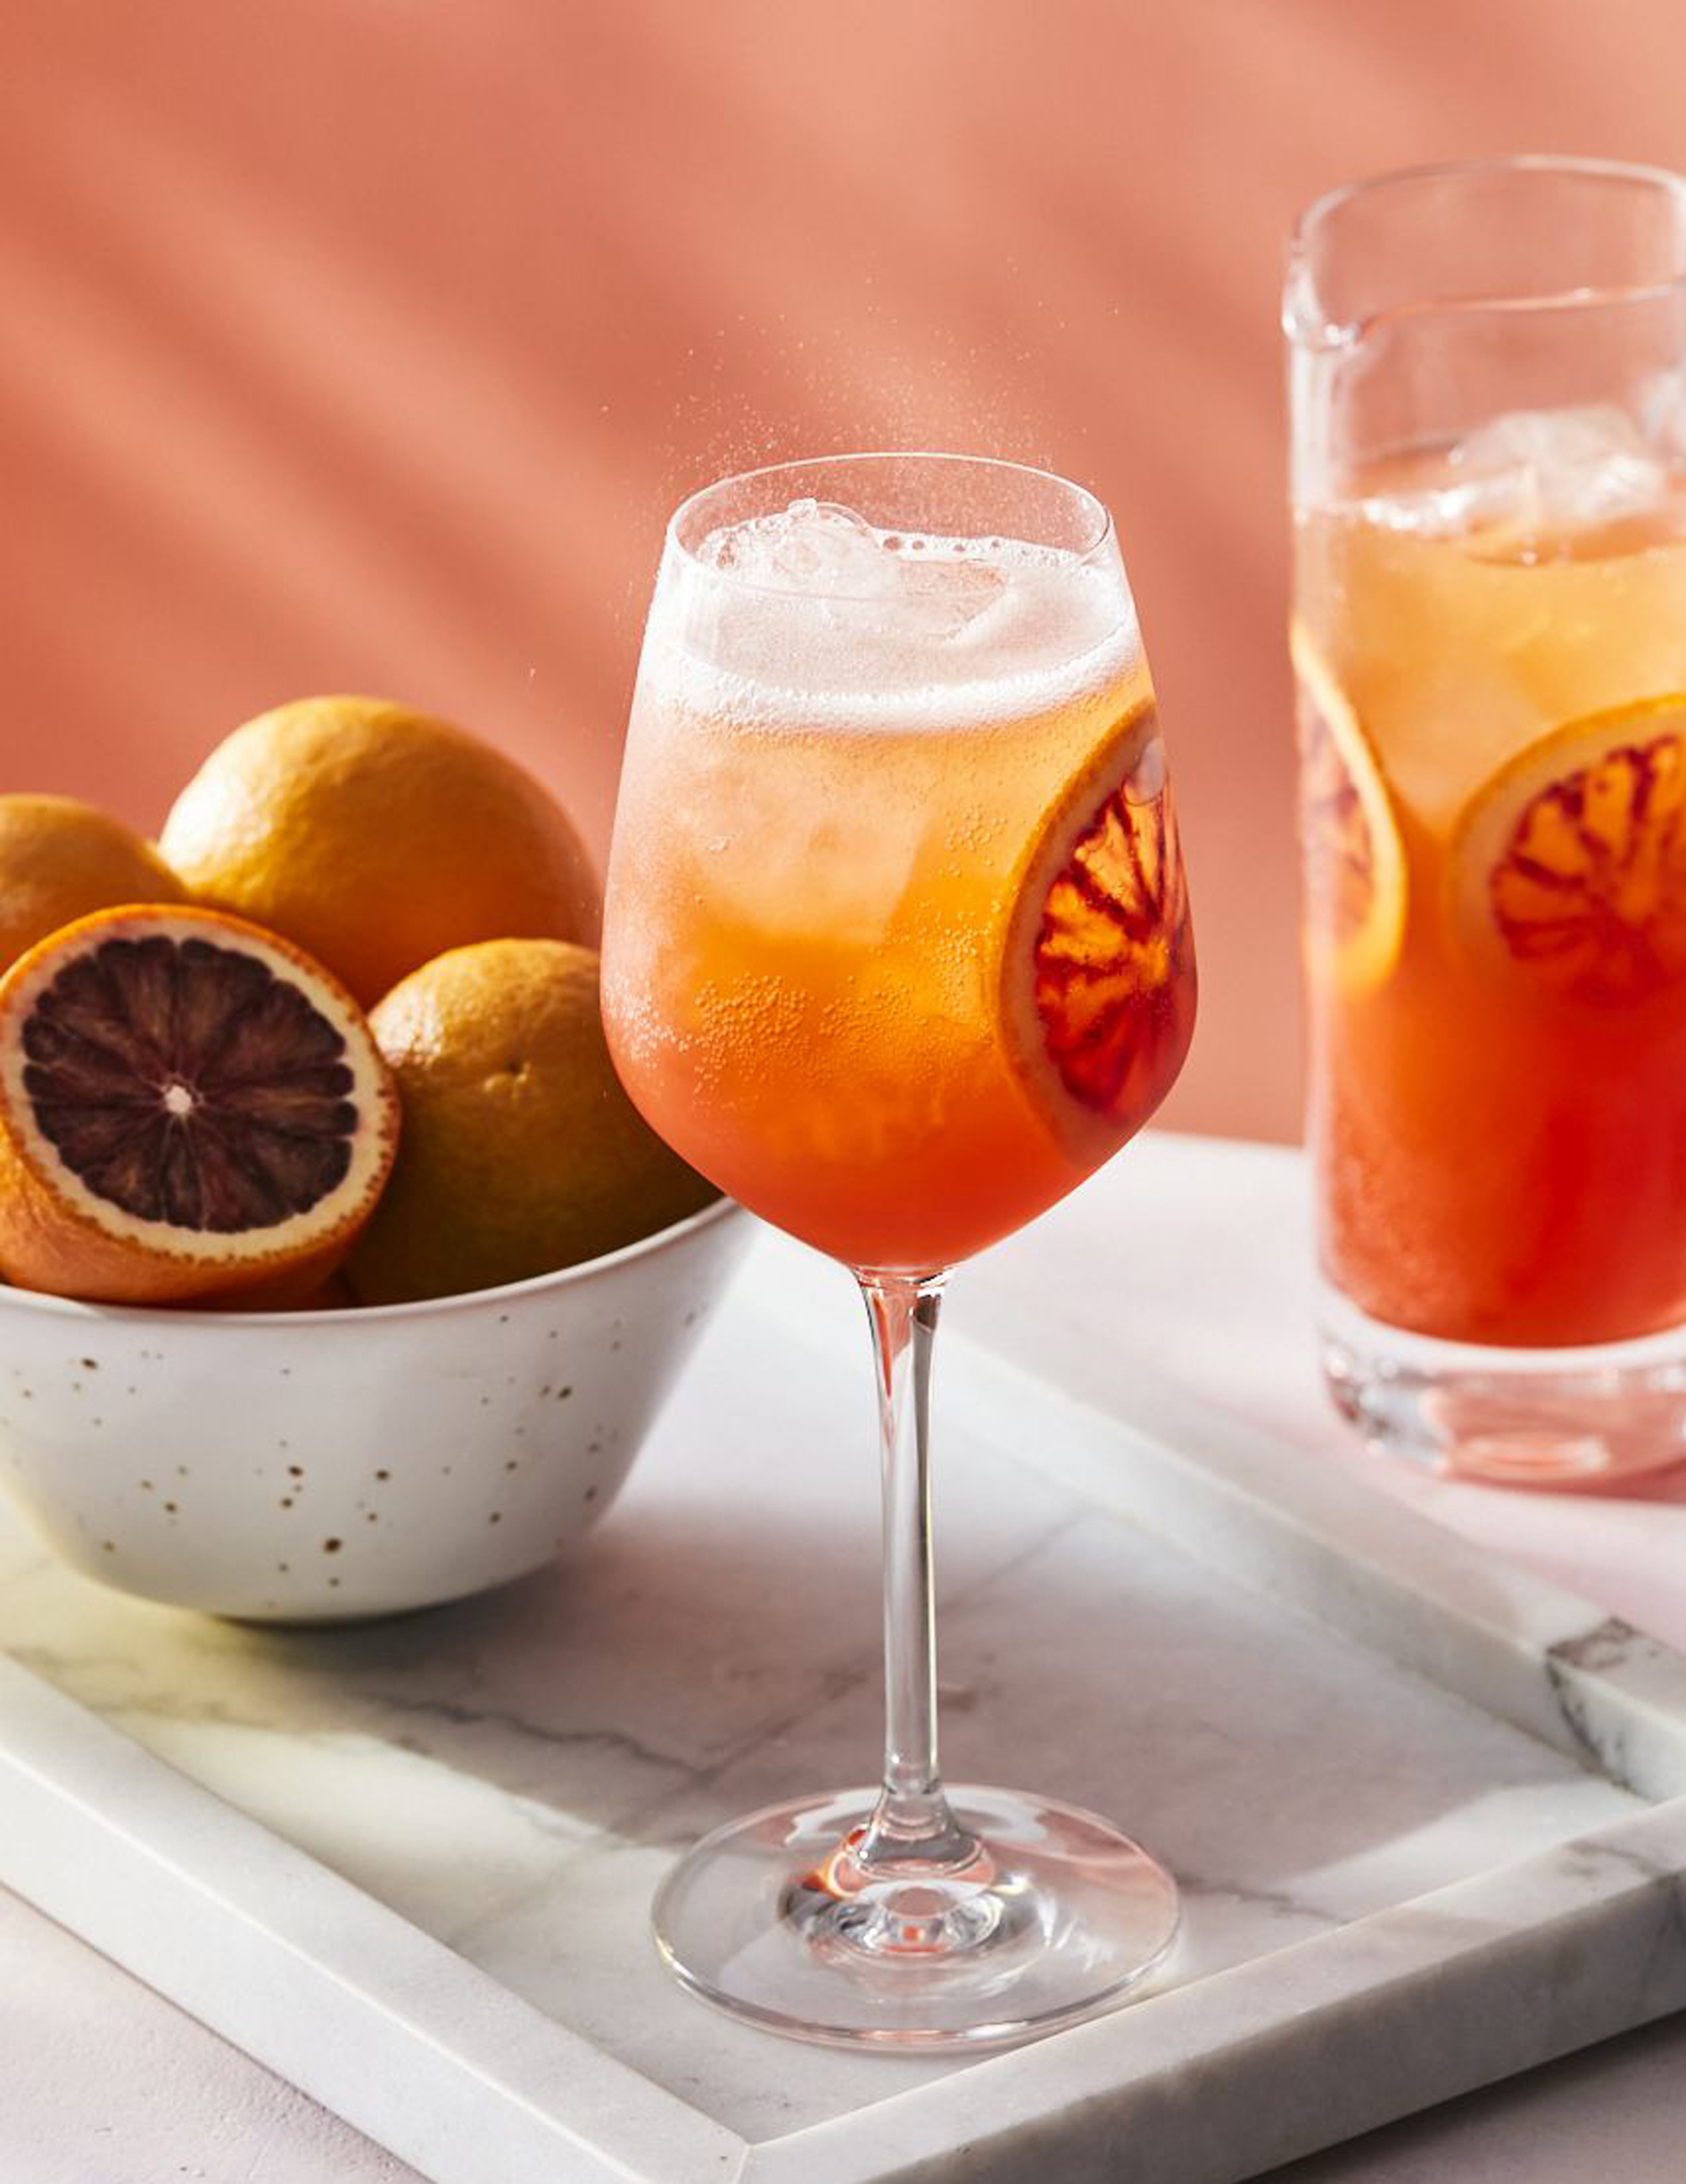 The Starburst cocktail from Just a Spritz by Danielle Centoni 